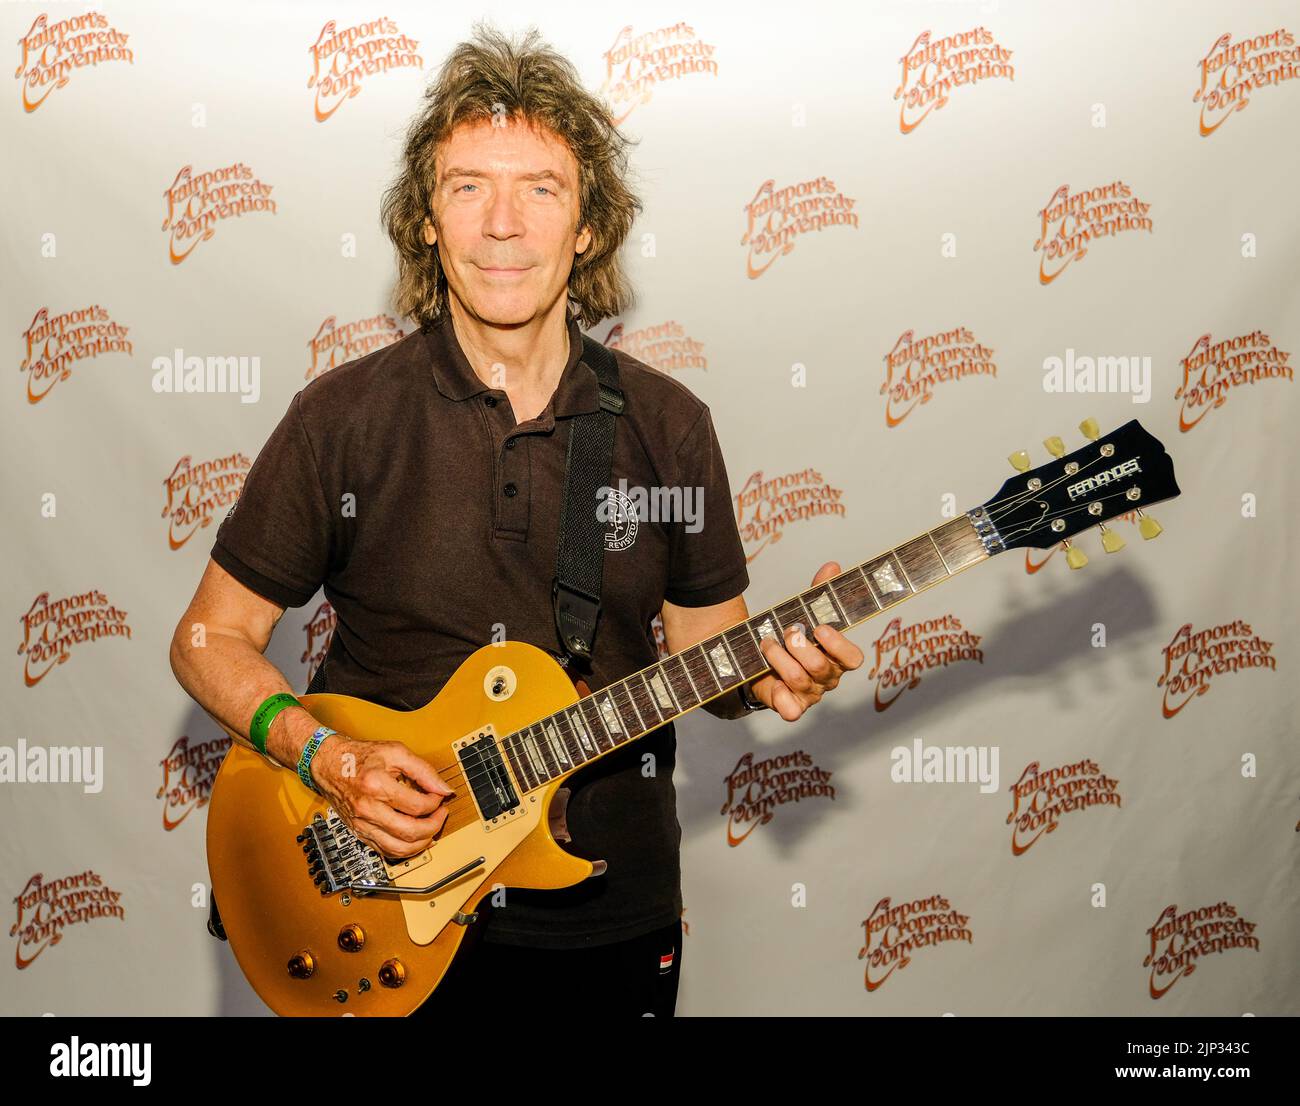 Cropredy Oxfordshire UK... Fairport Cropredy Convention.Genesis legendary lead guitarist Steve Hackett backstage prior to performing at this years  Fairport Cropredy Convention. Stock Photo